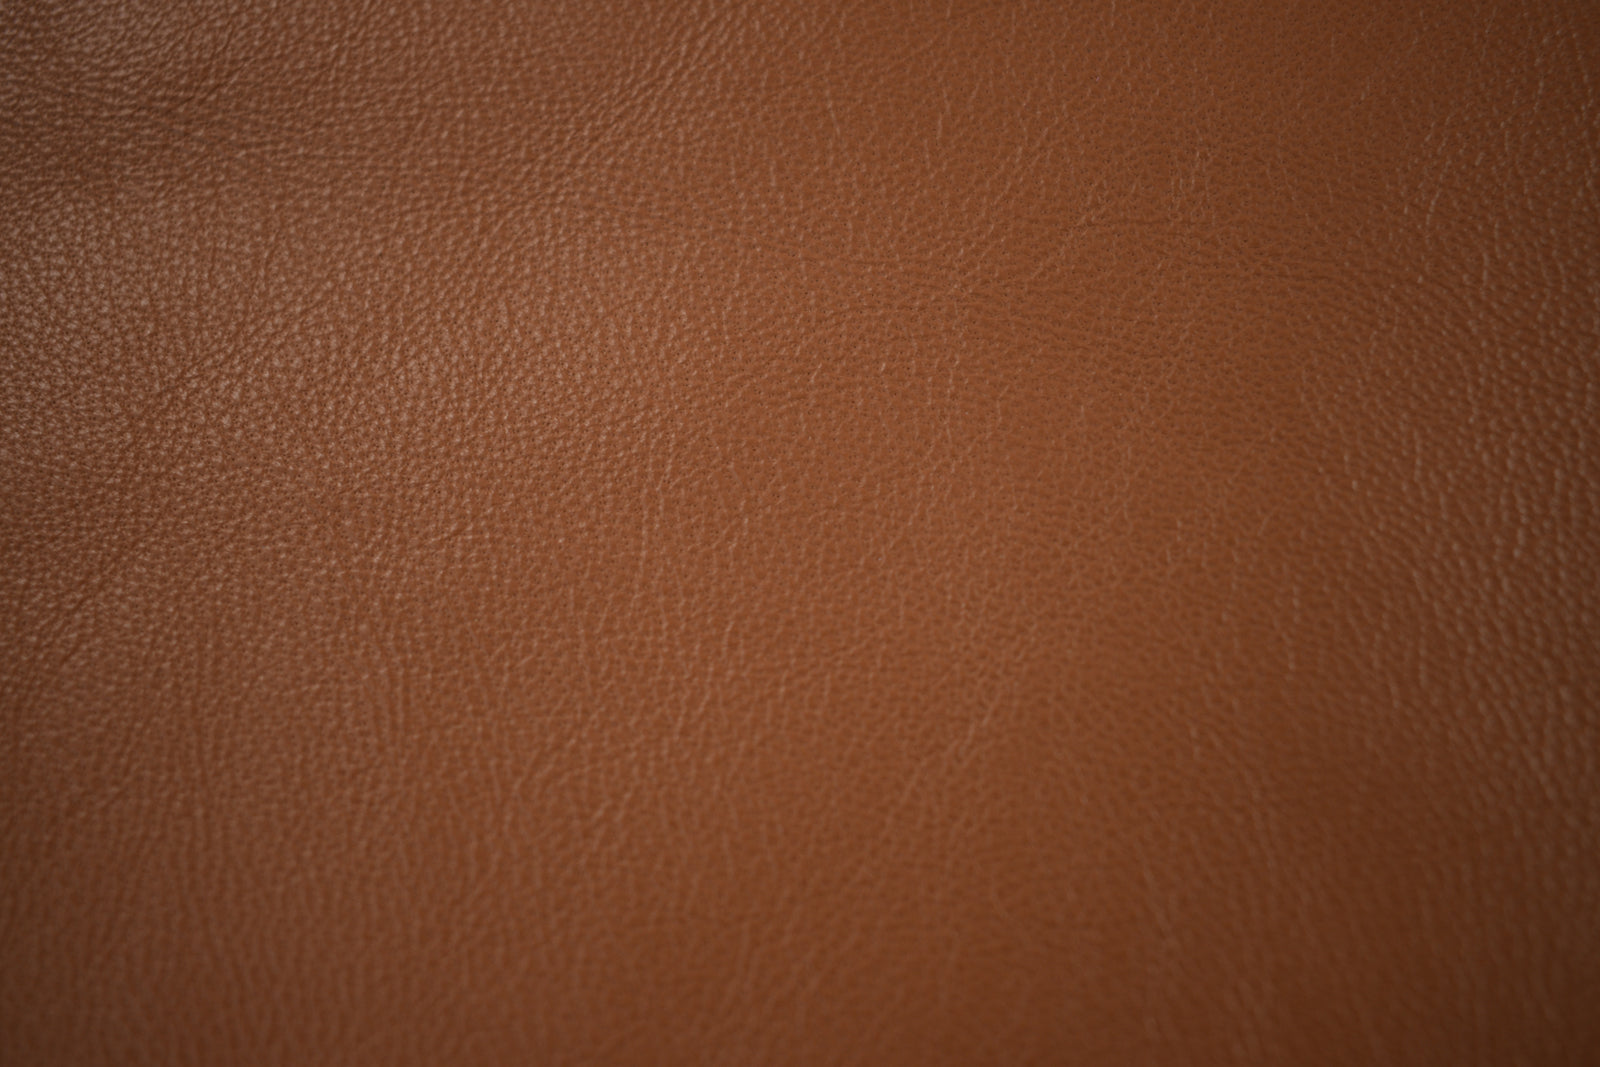 Close up of buttery soft saddle tan lambskin hides, perfect for couture fashion and home furnishings. Fine grain texture, soft and pliable. 8-10 sq ft sizes.